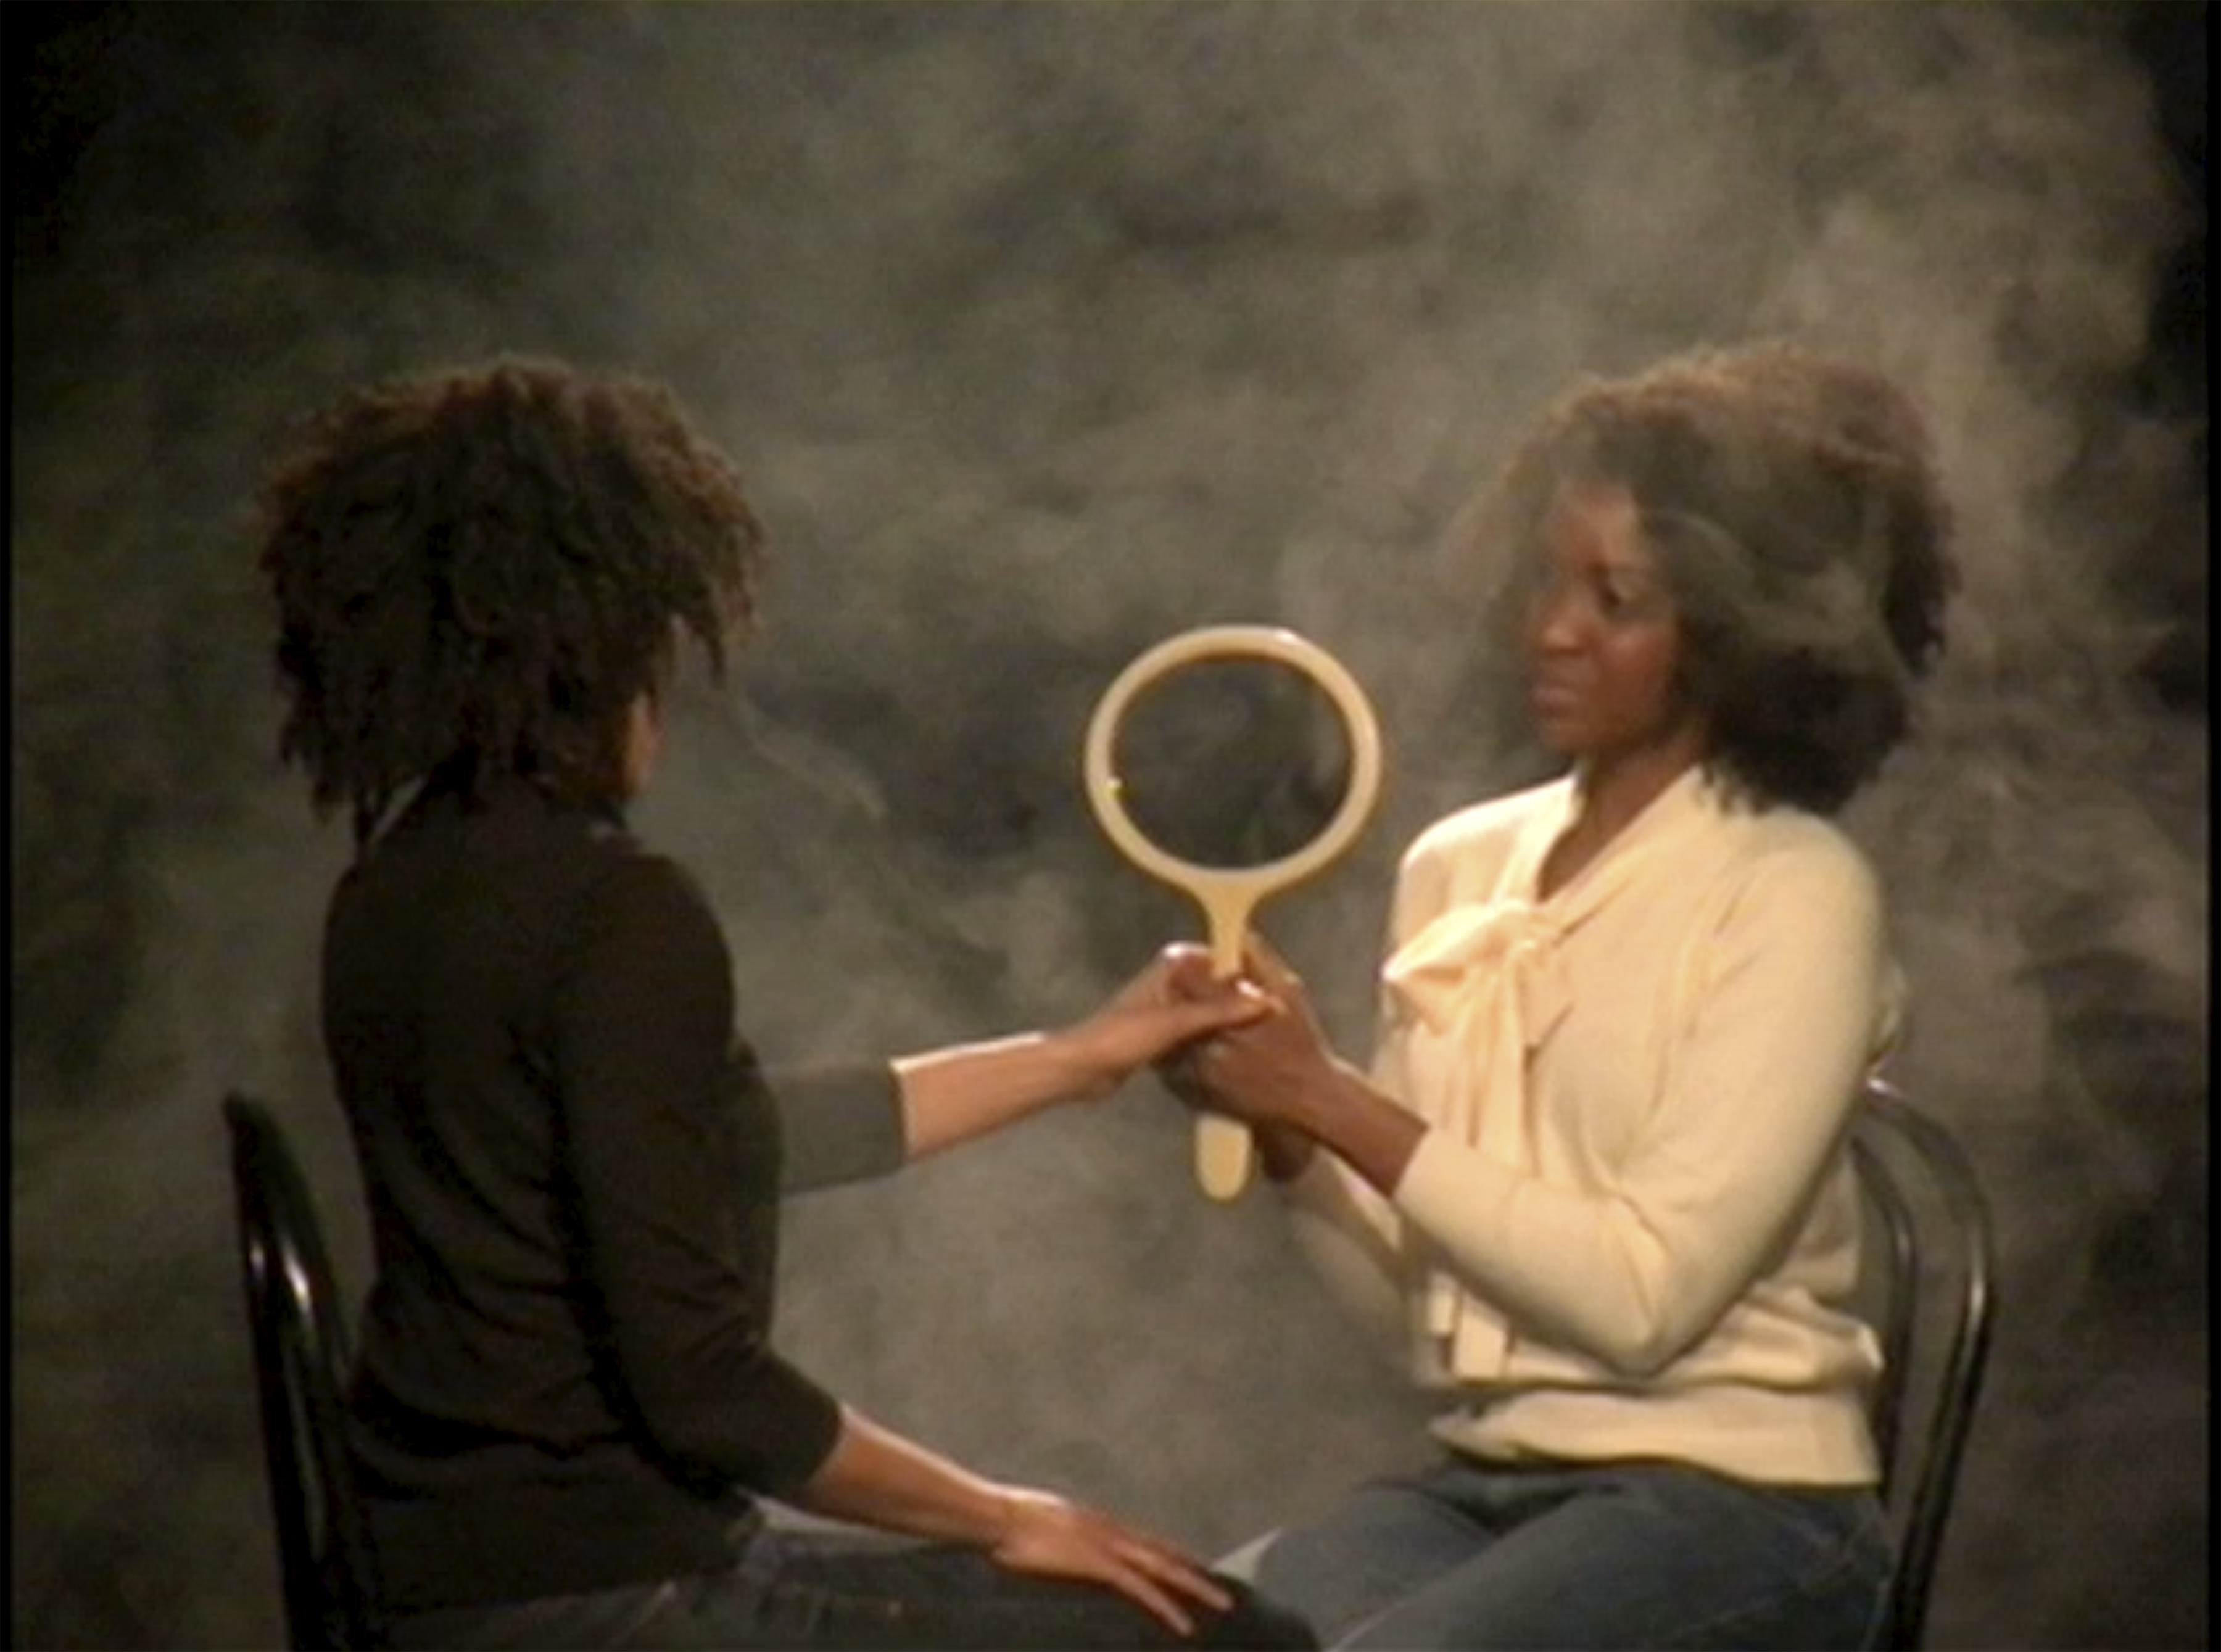 Still of "I Look at Women" by Carrie Mae Weems